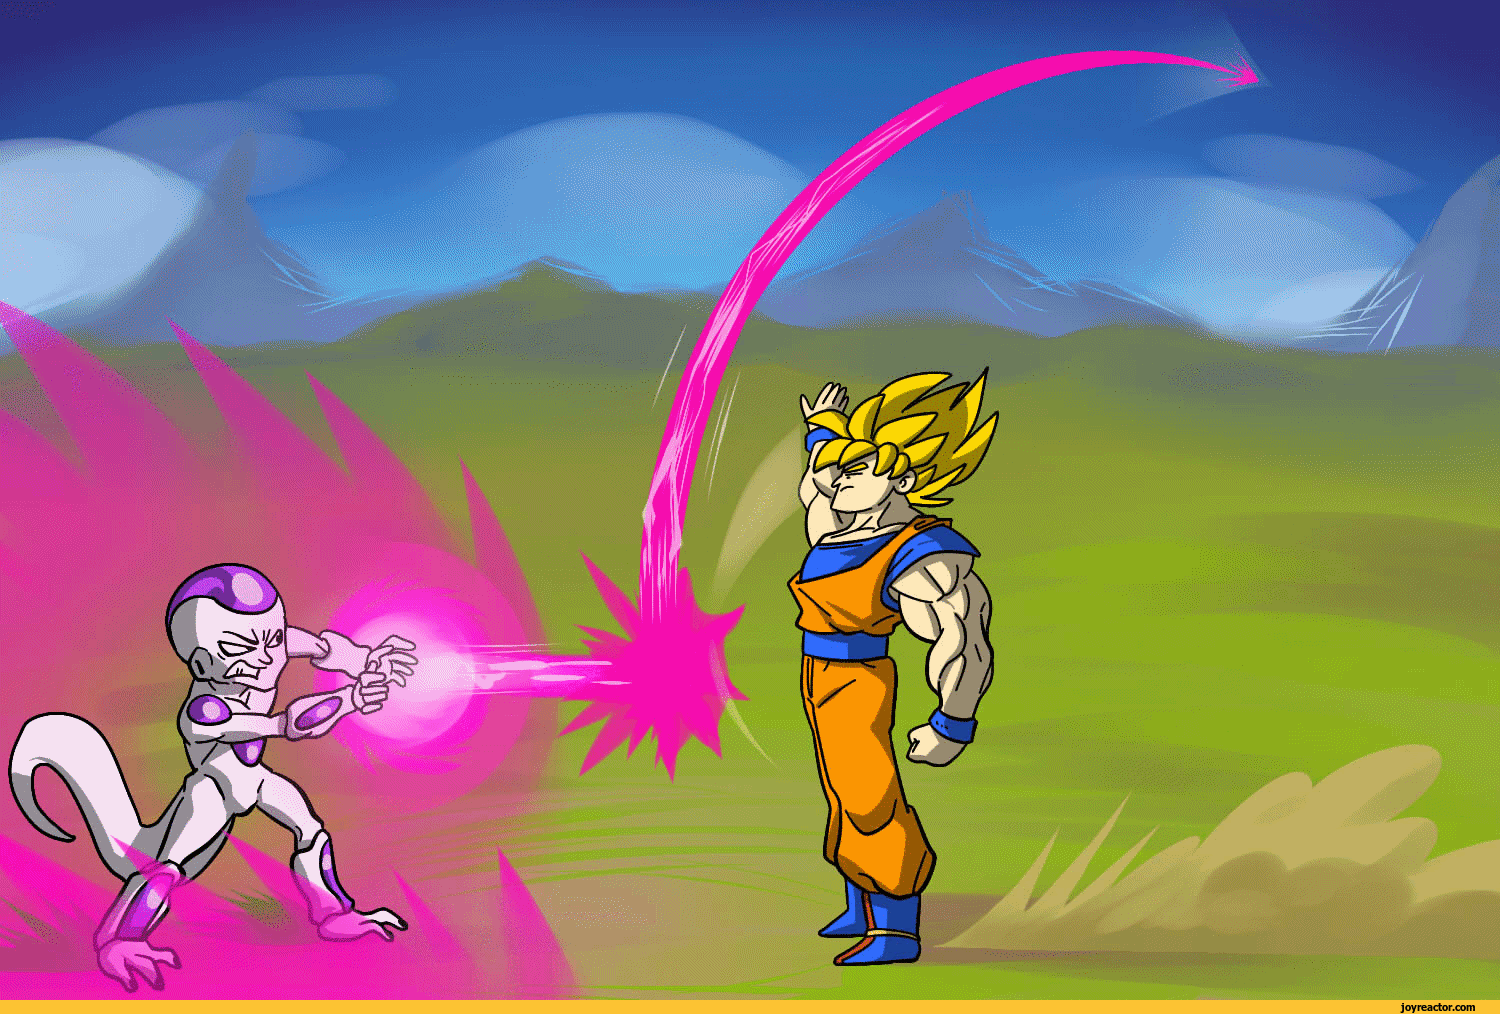 # reaction # dragonball # dragonball z # super sayan # sangoku. The Only Outcome Possible For The New Dragonball Z Movie Dorkly Dragon Ball Z Jhall Gif Gif Animation Animated Pictures Comics Funny Comics Strips Cartoons